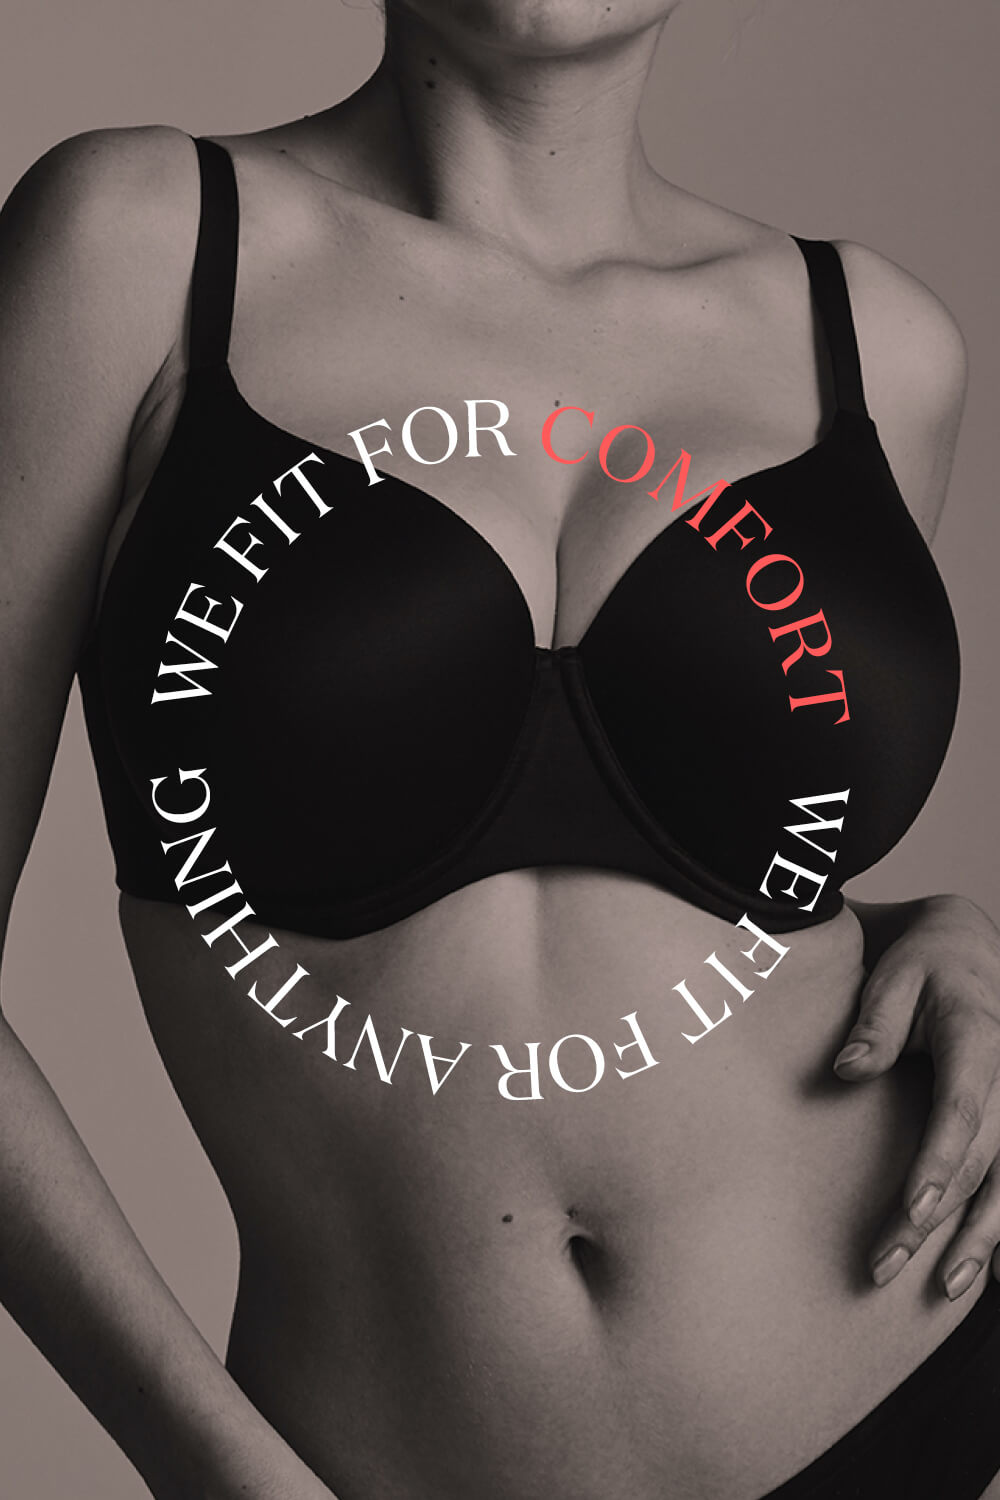 Bras N Things celebrate the female form with launch of new 'We Fit For  Anything' campaign - Melissa Hoyer